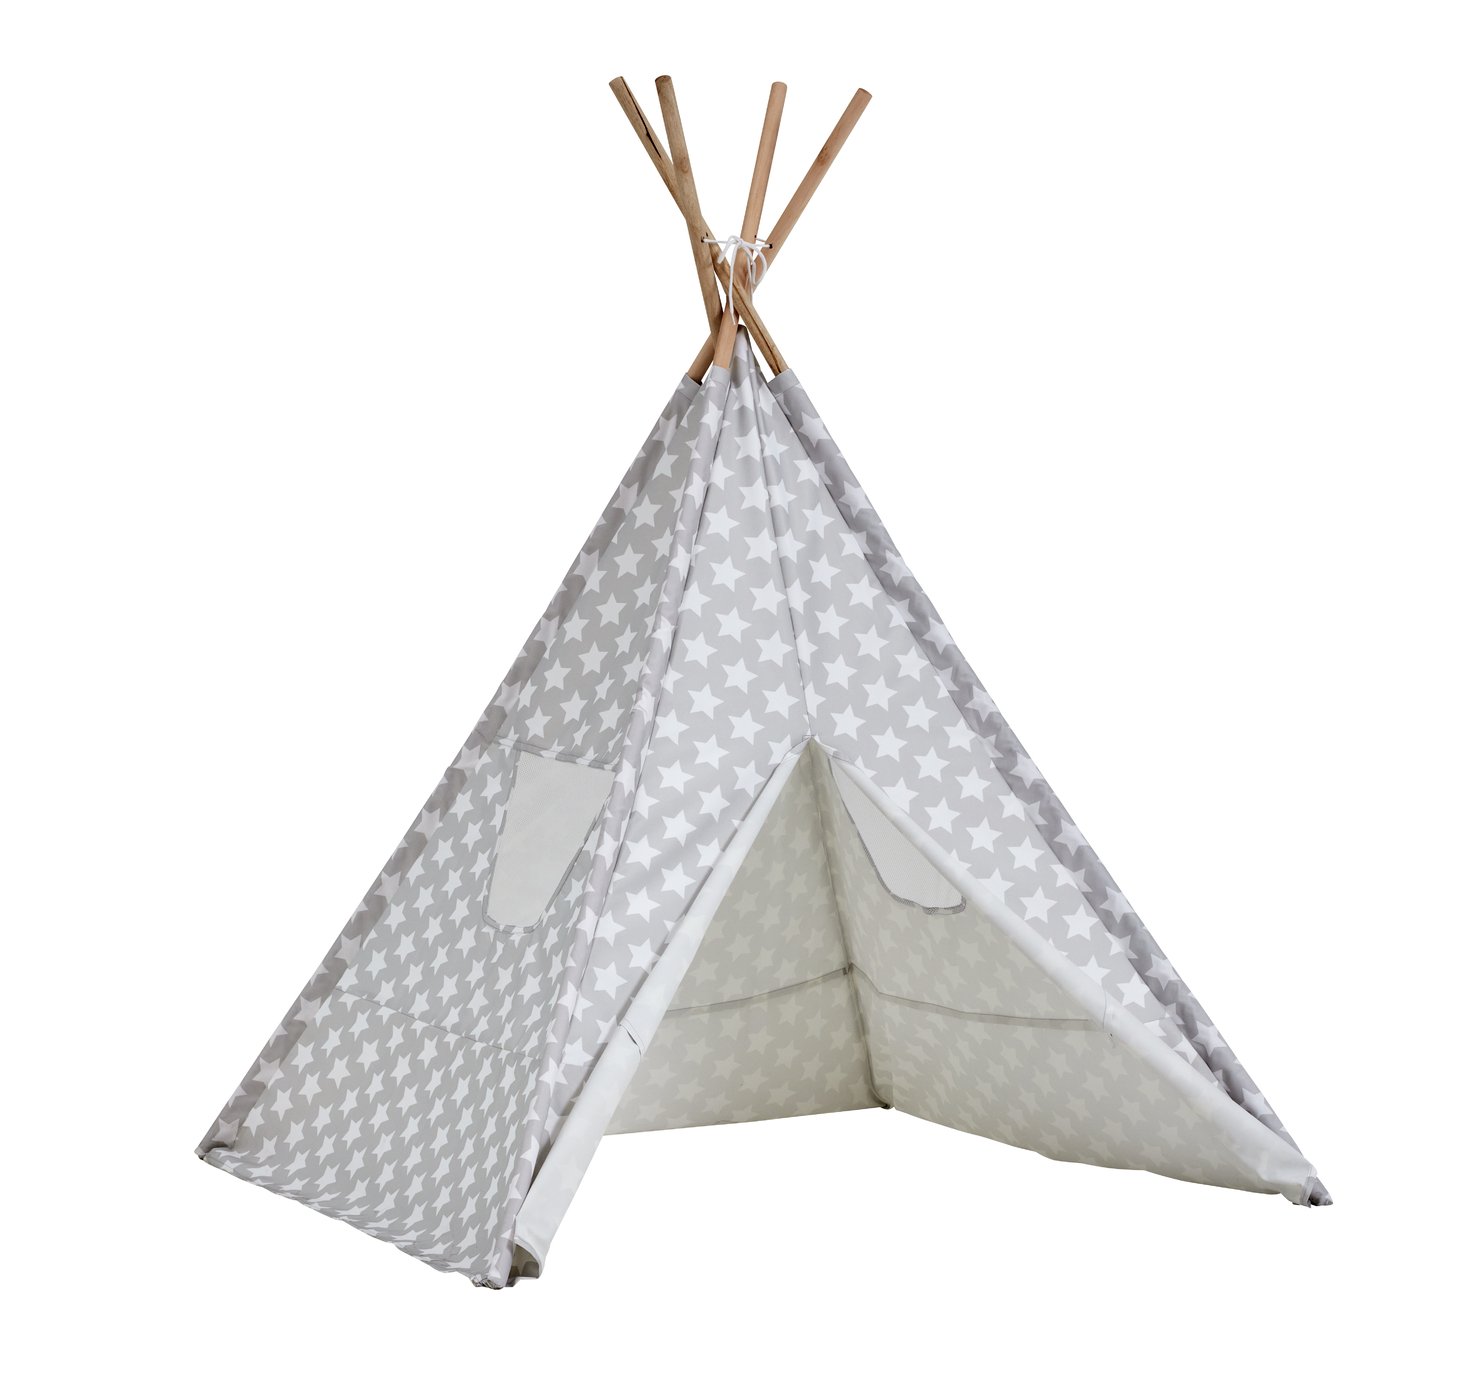 Kaikoo Kids Play Silver Teepee Tent Review